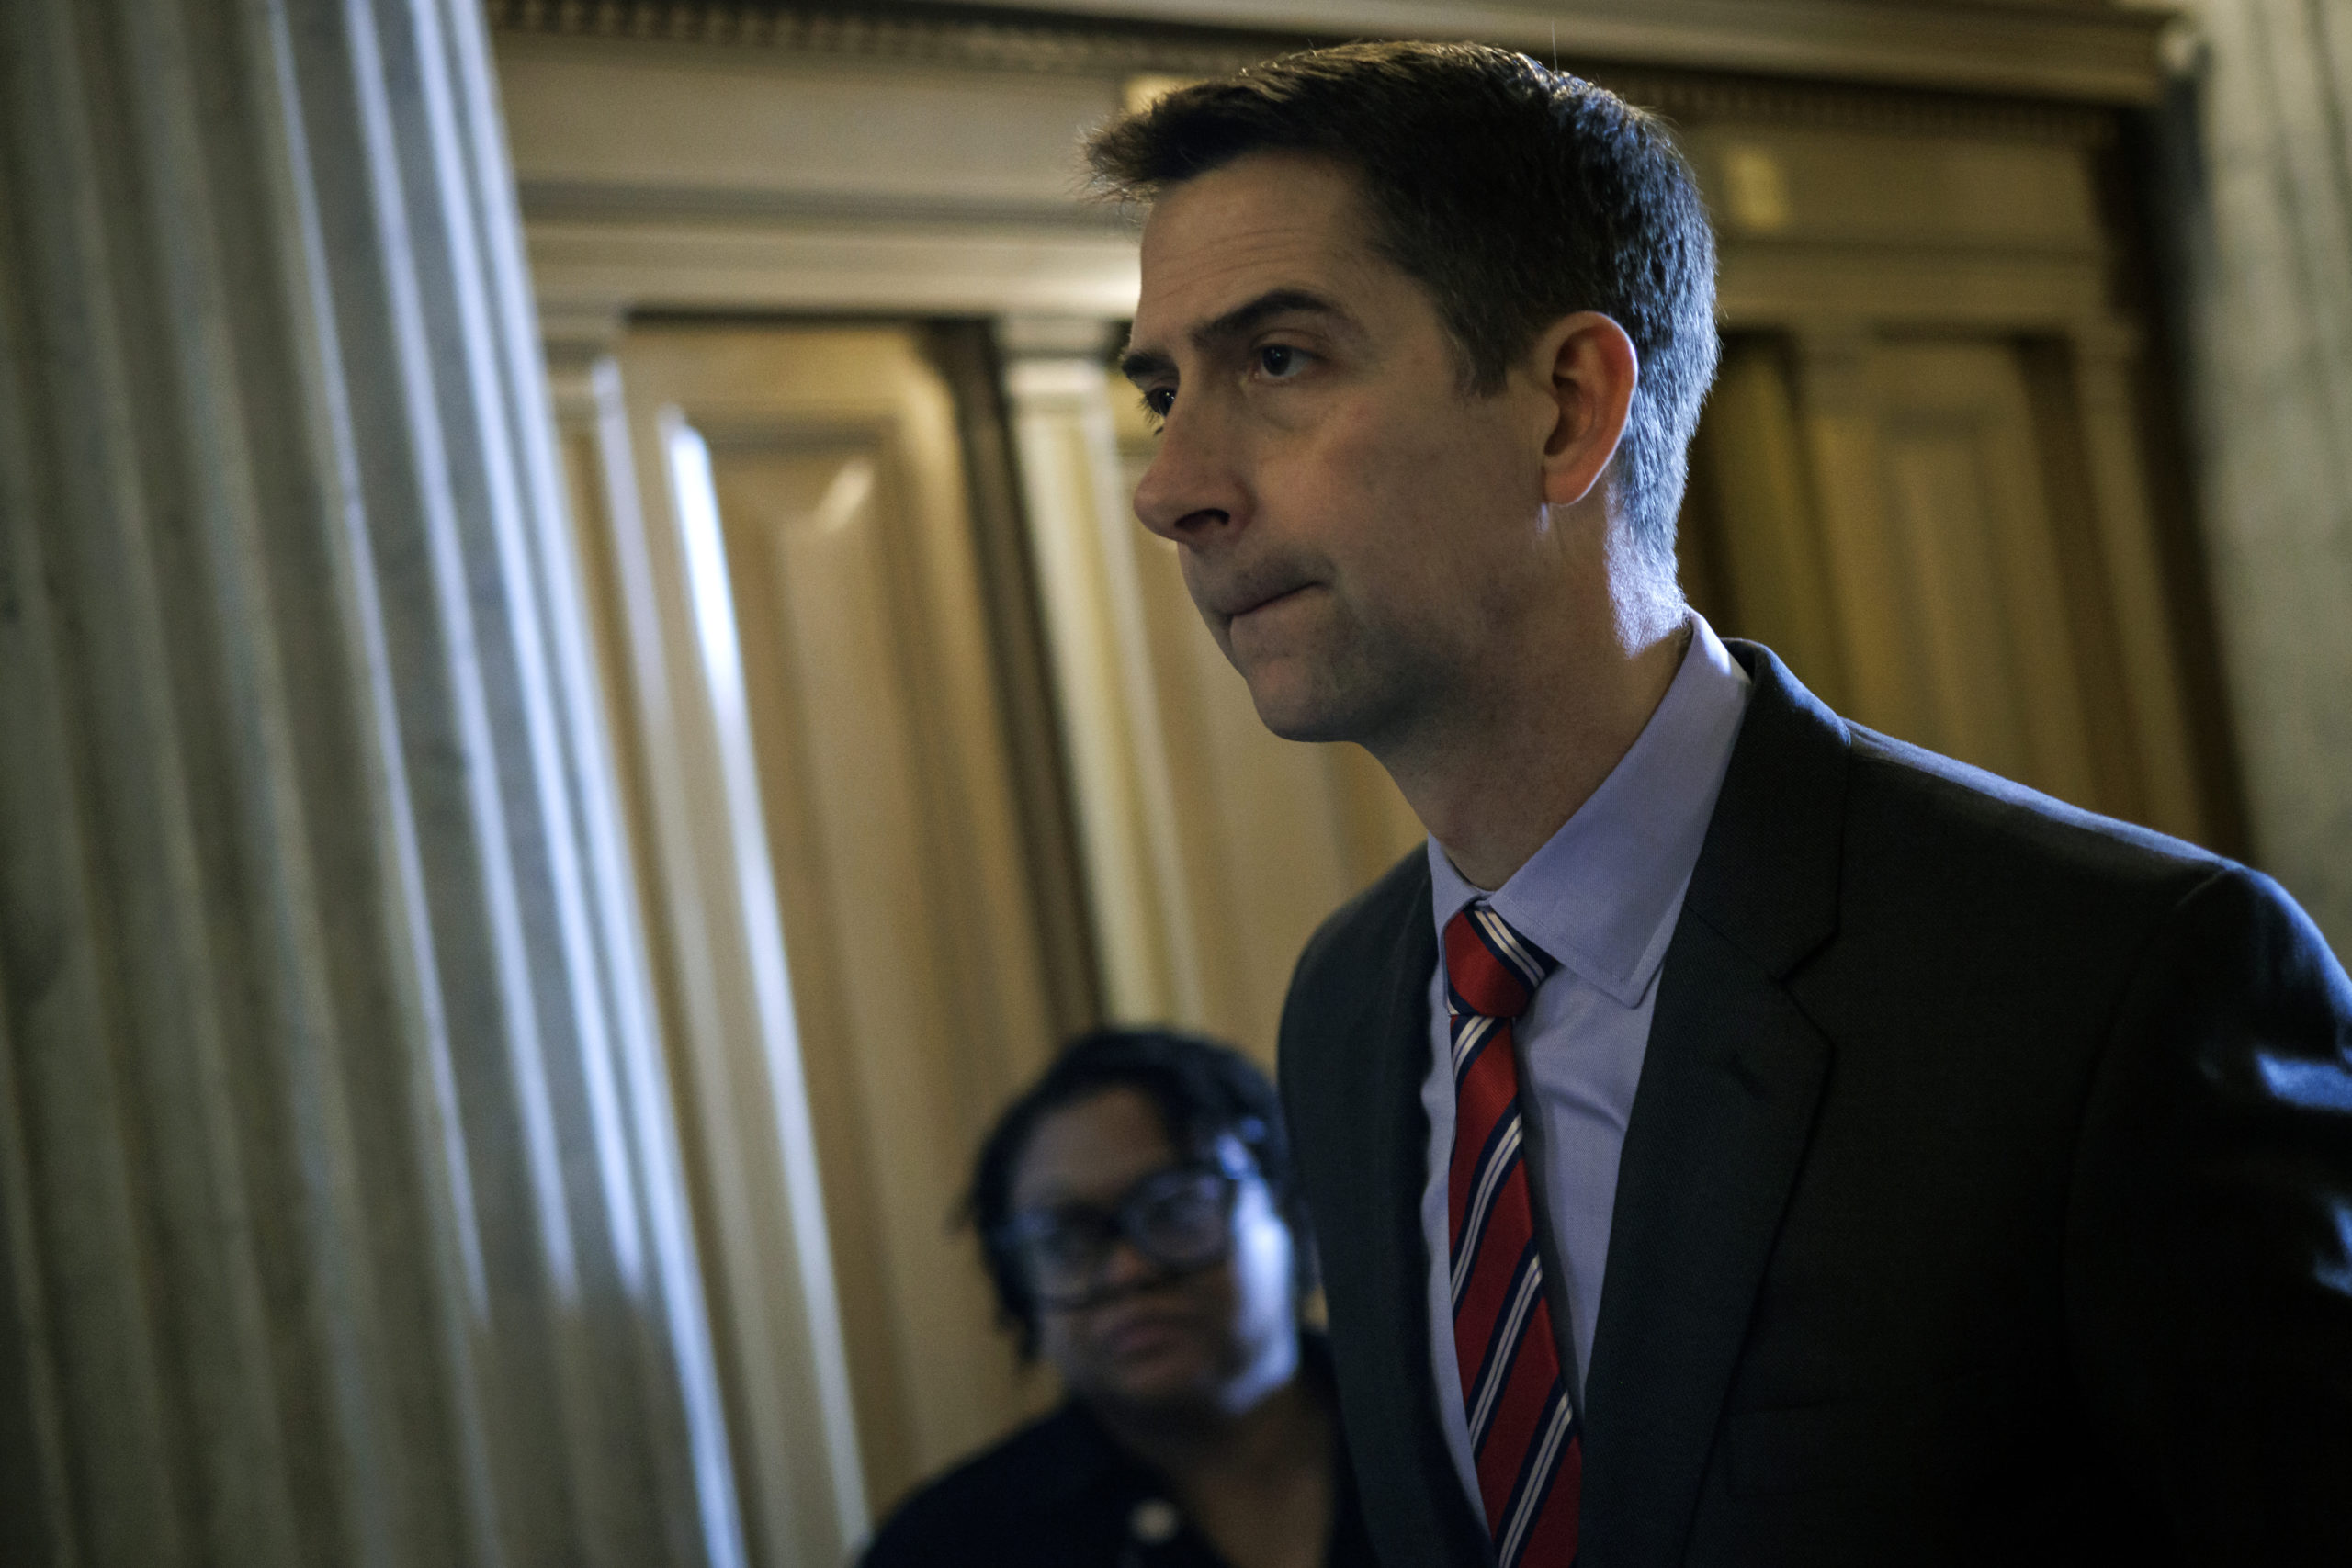 WASHINGTON, DC - JANUARY 23: U.S. Senator Tom Cotton (R-AR) heads to the Senate floor for a vote on January 23, 2024 in Washington, DC. Negotiations over border security, military aid to Ukraine and Israel, and the government budget continue this week on Capitol Hill. (Photo by Samuel Corum/Getty Images)